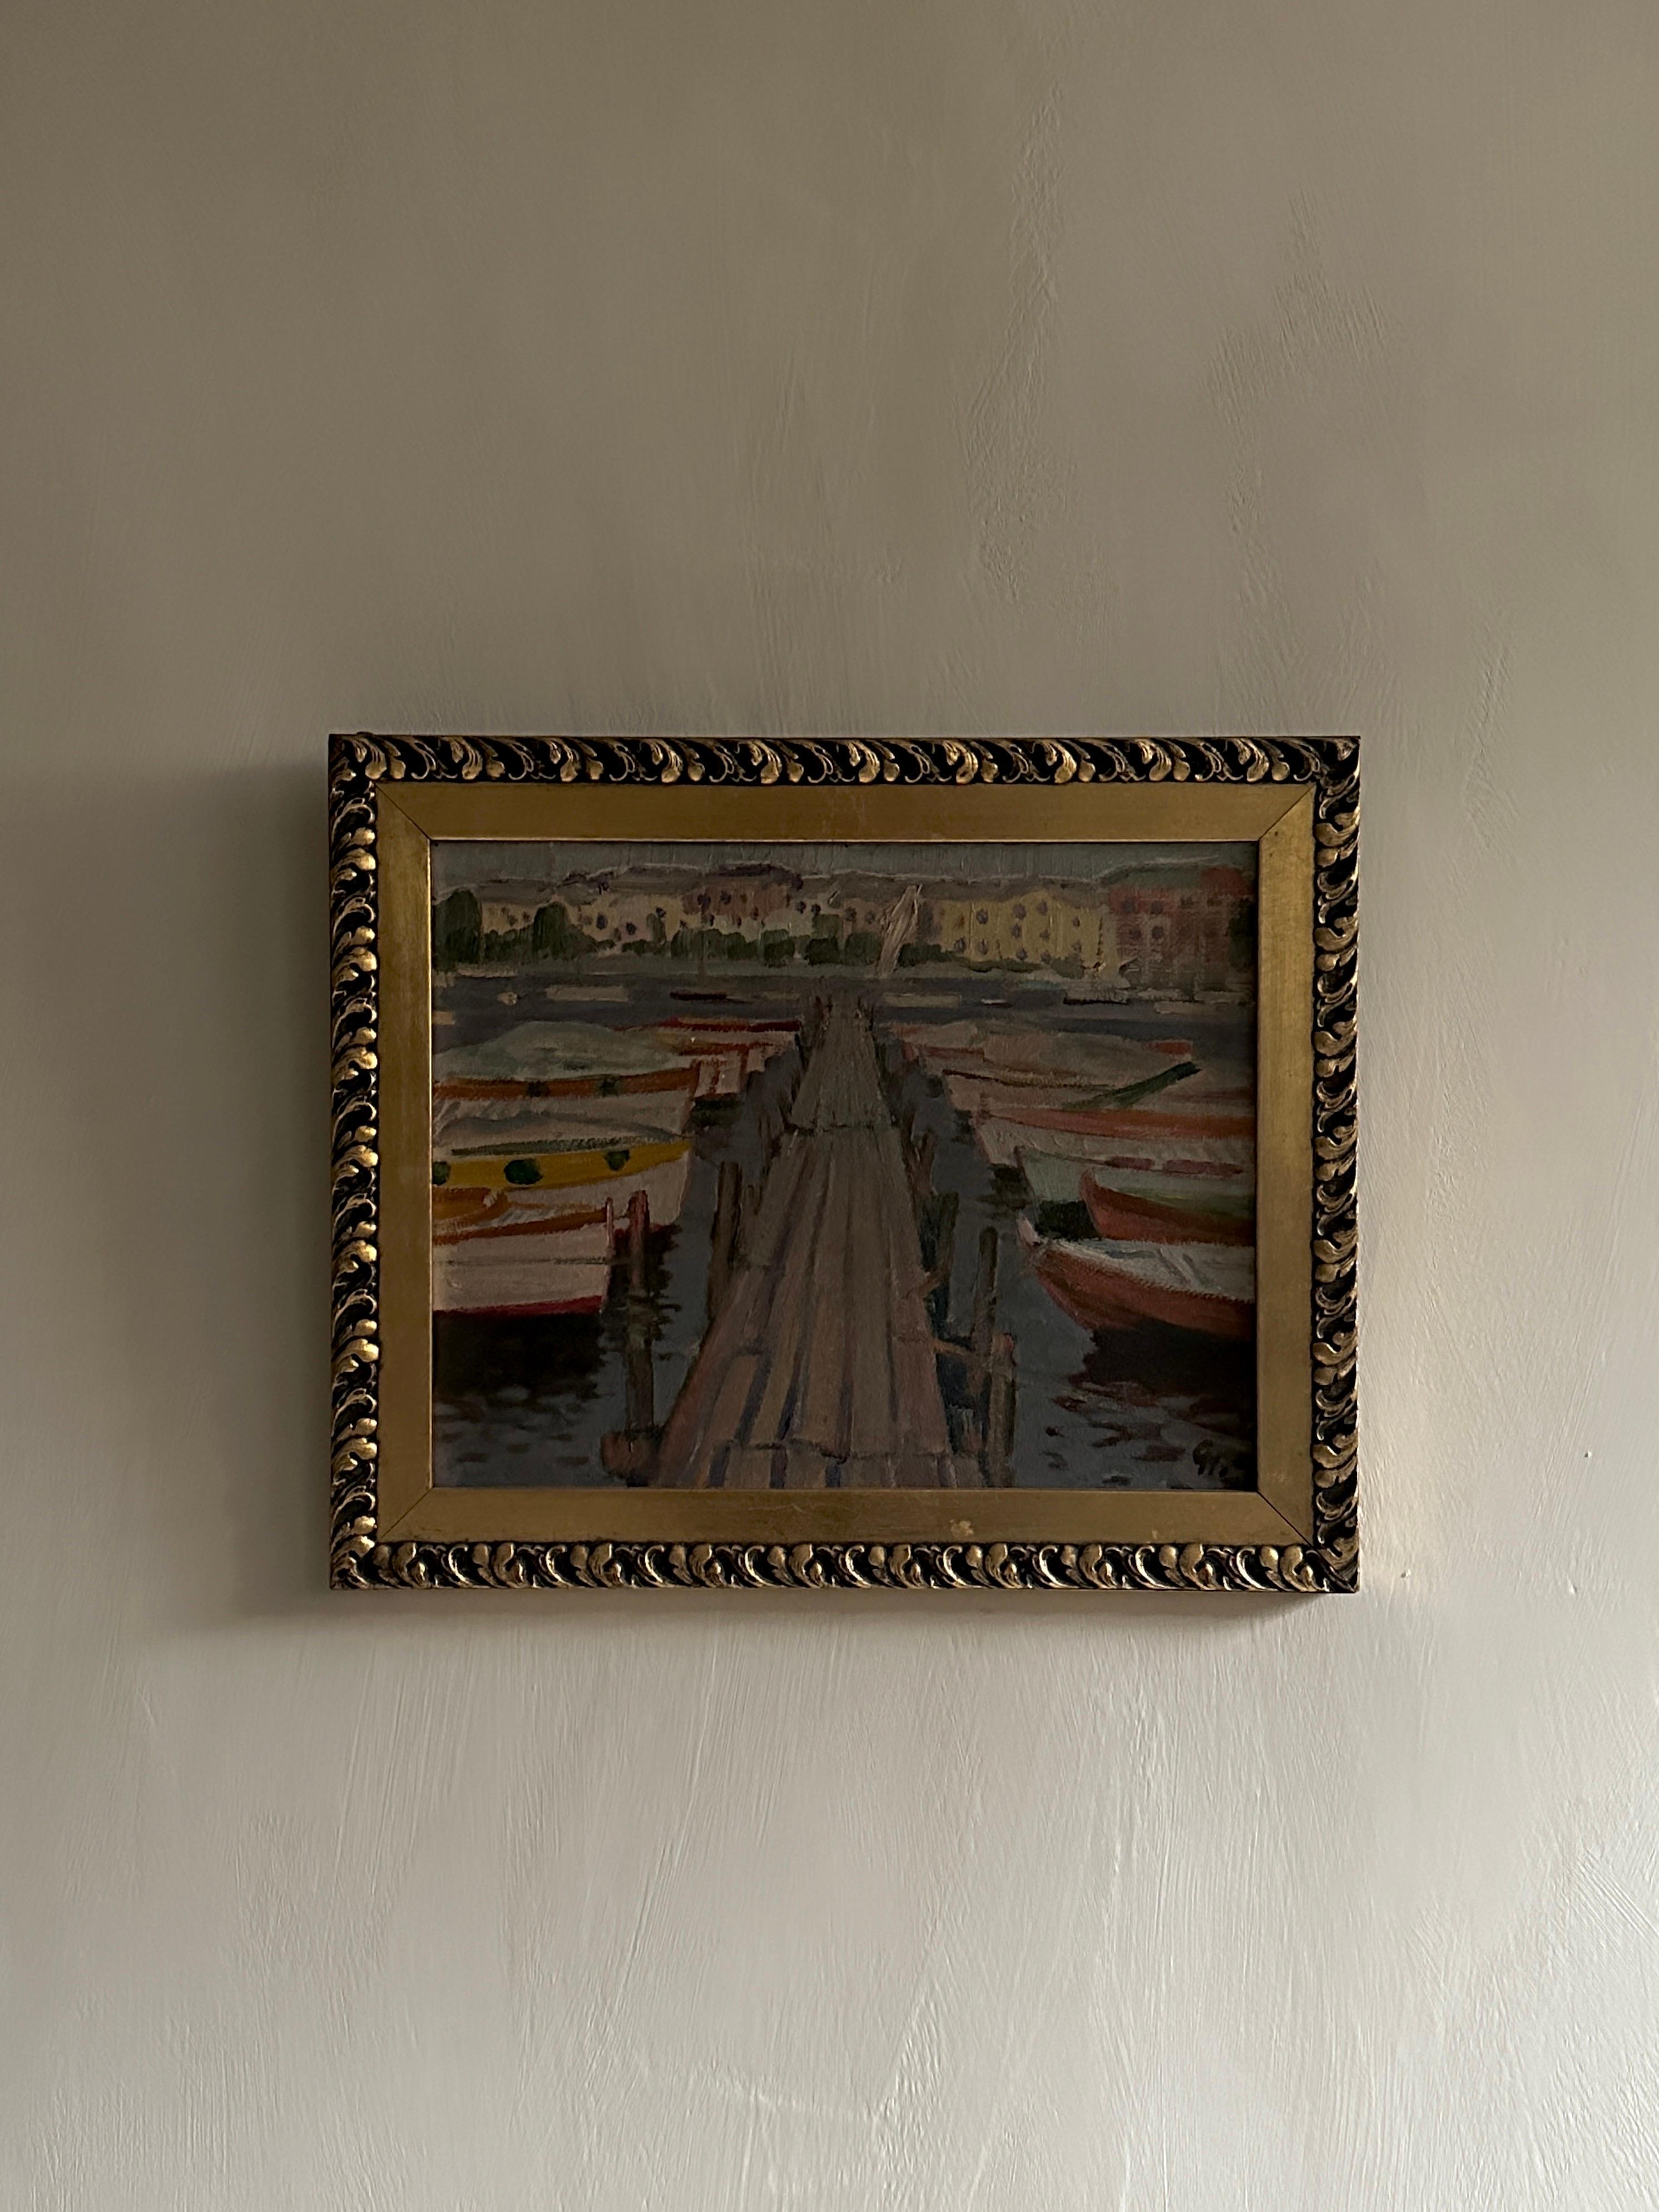 A melancholy painting of boats on a port. Oil on wood panel, signed and framed. Norway c. early 1900s.